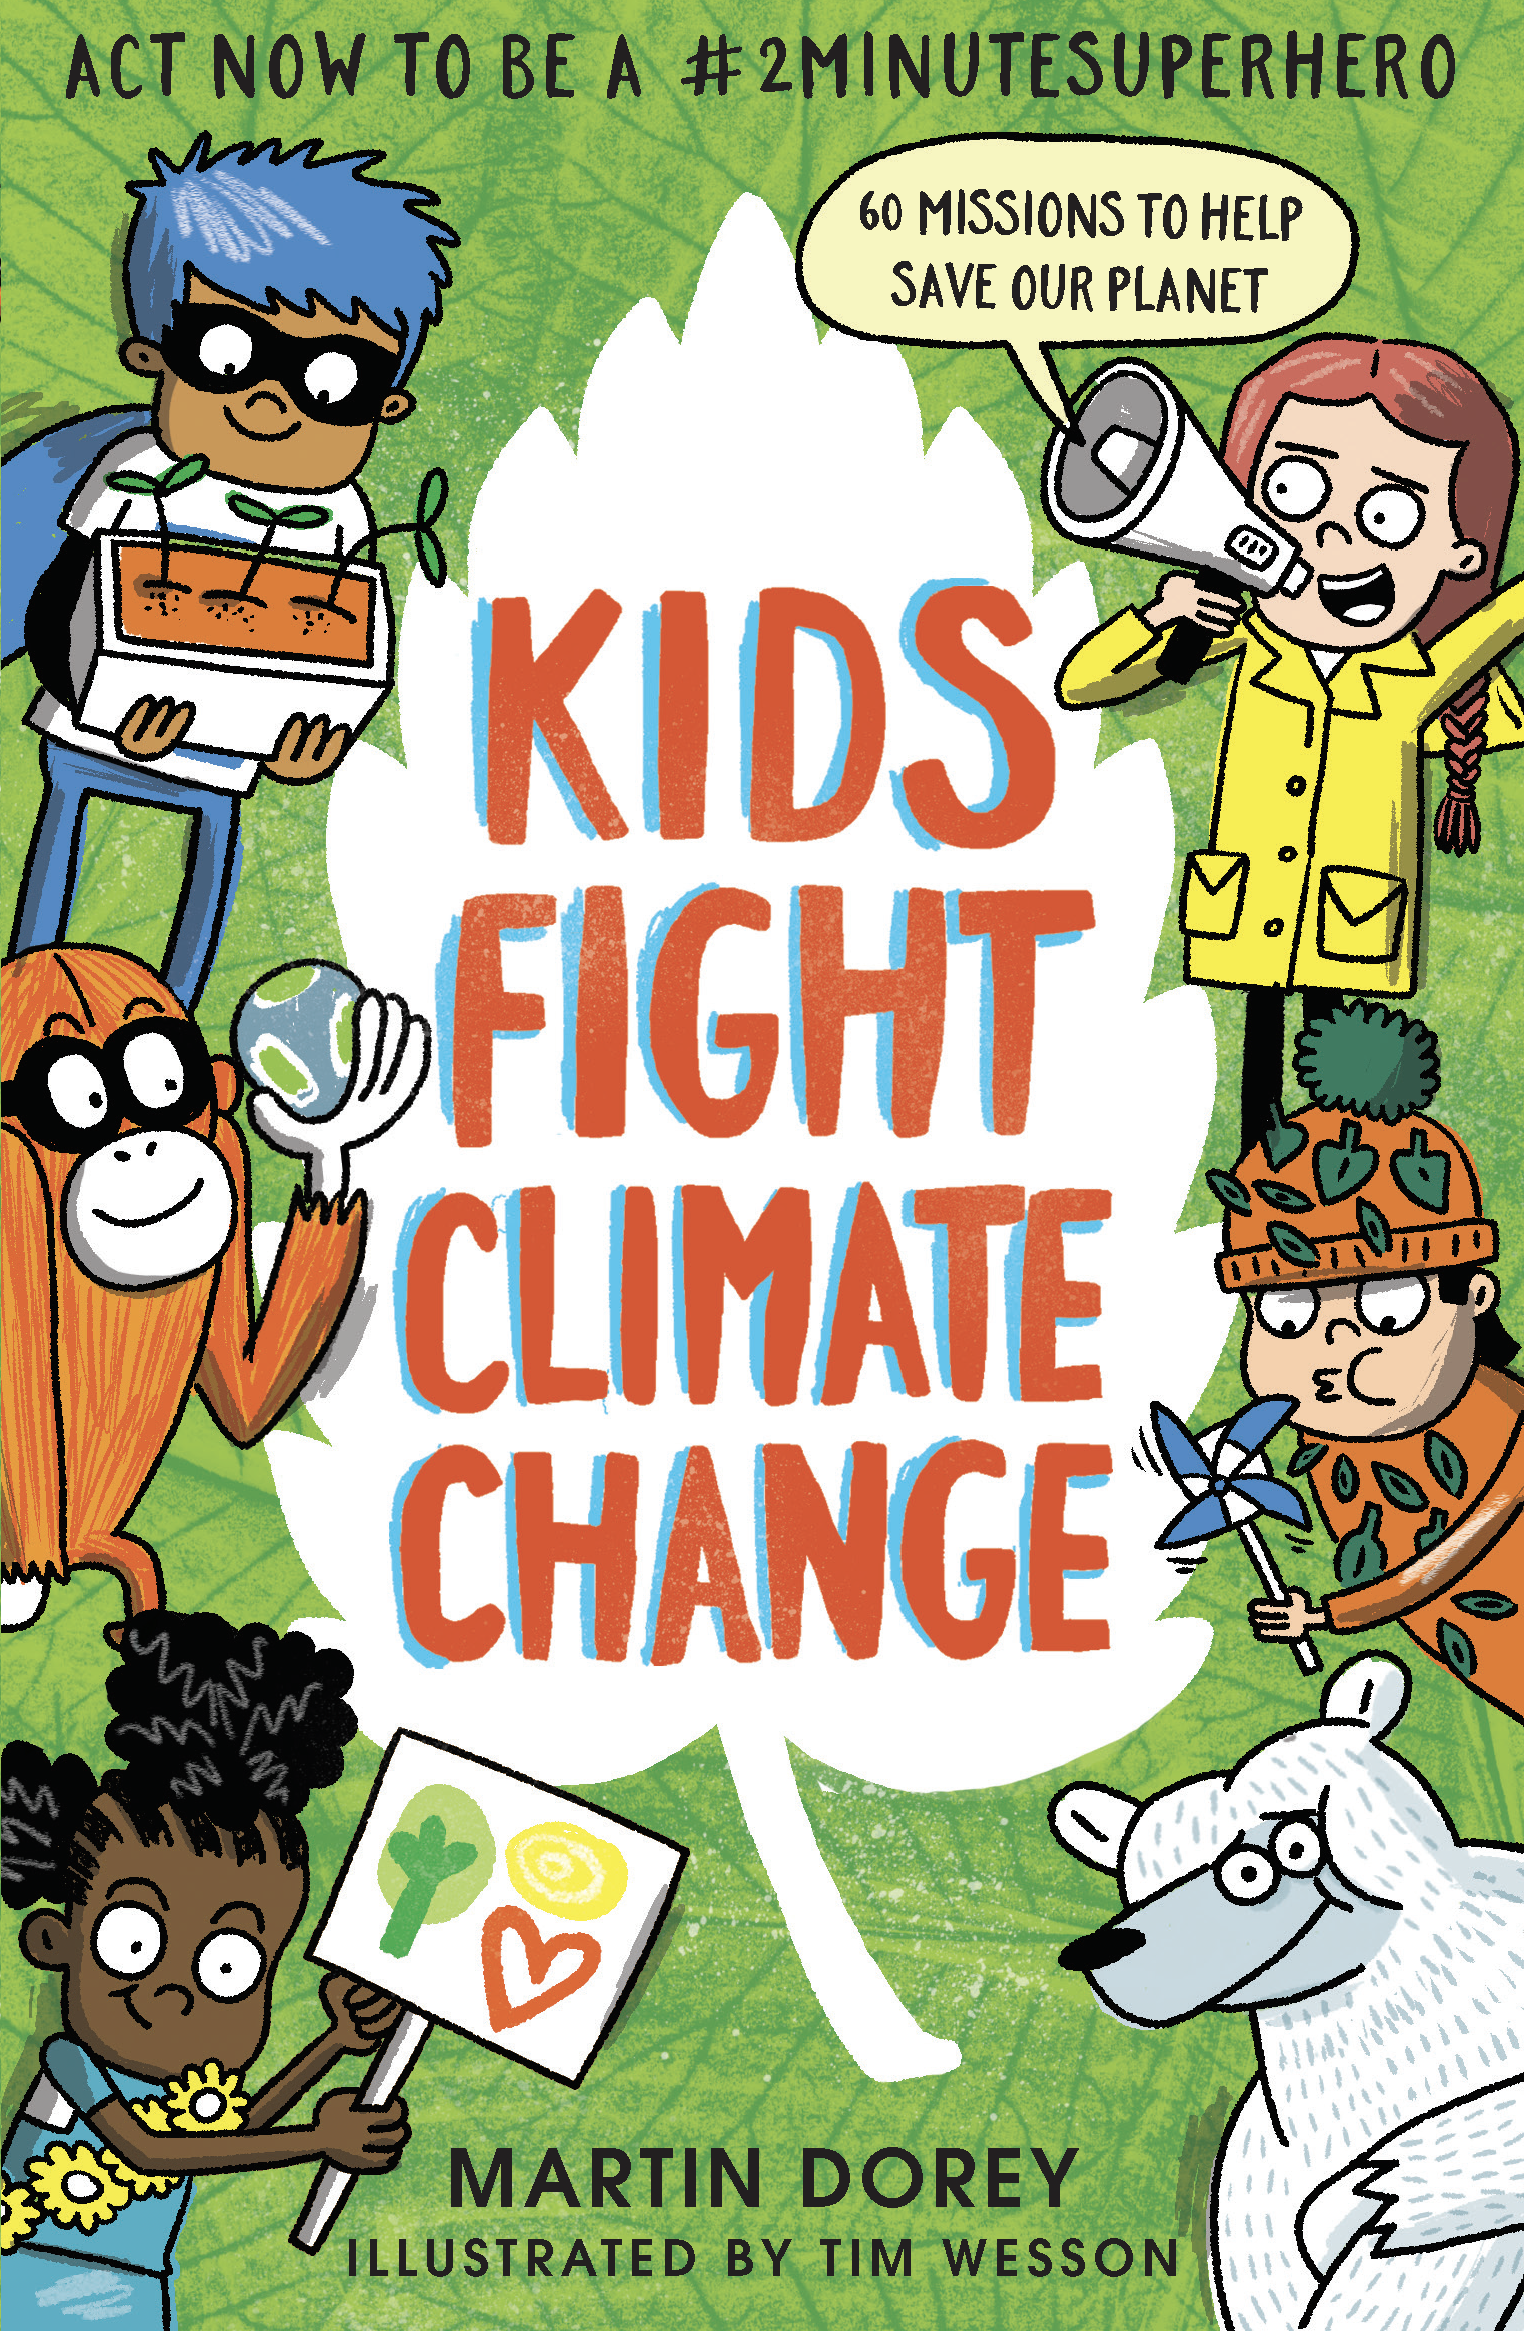 Kids-Fight-Climate-Change-Act-now-to-be-a-2minutesuperhero